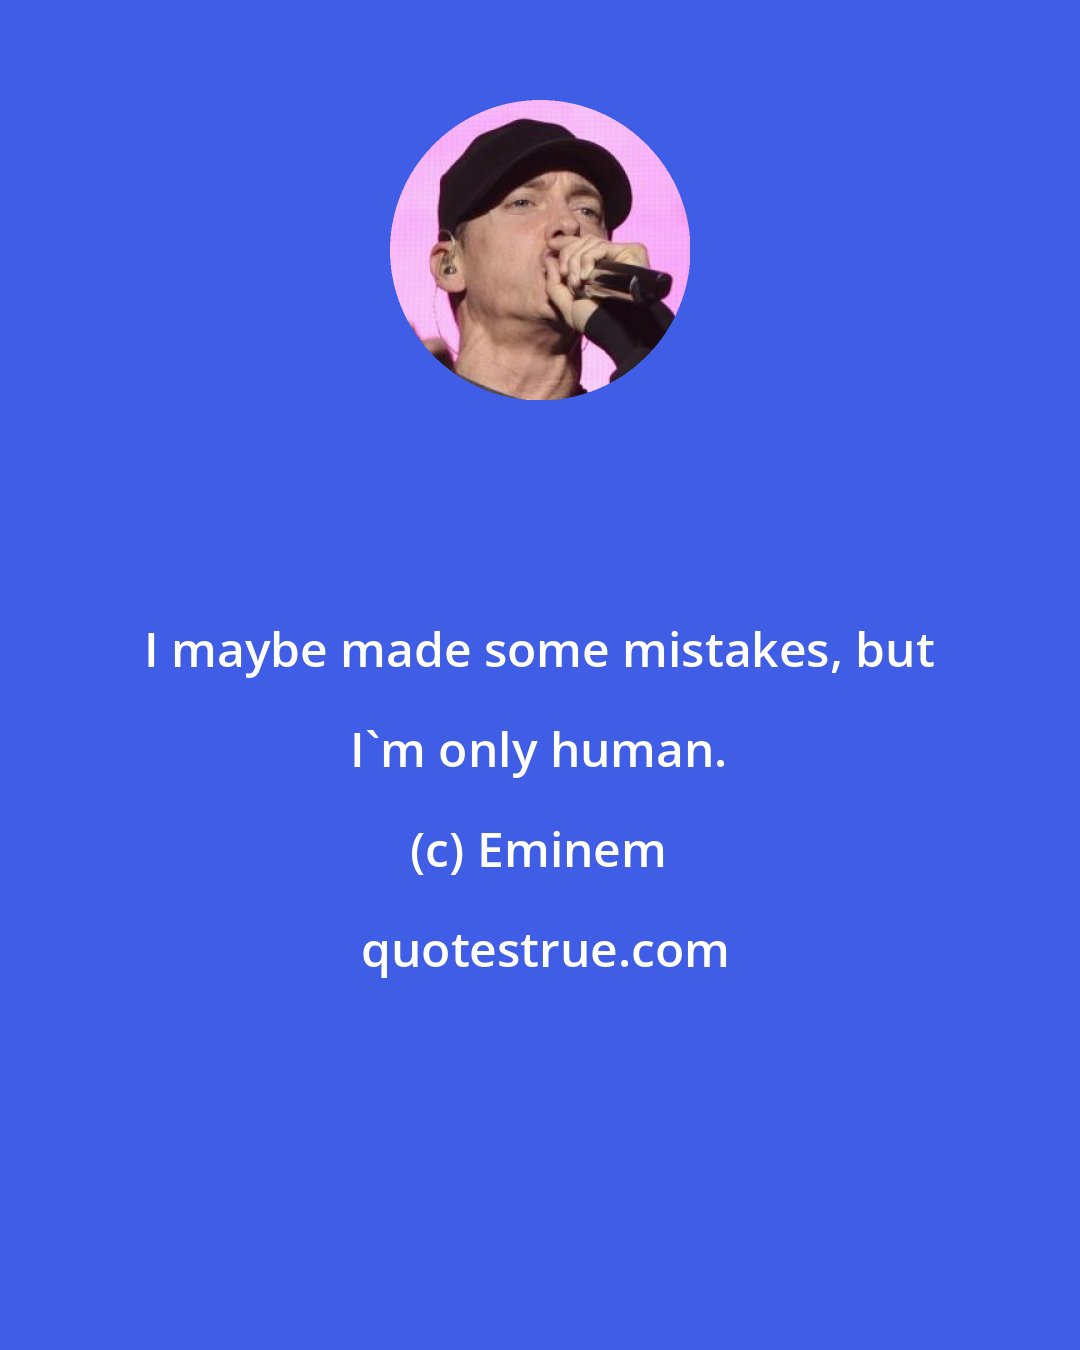 Eminem: I maybe made some mistakes, but I'm only human.